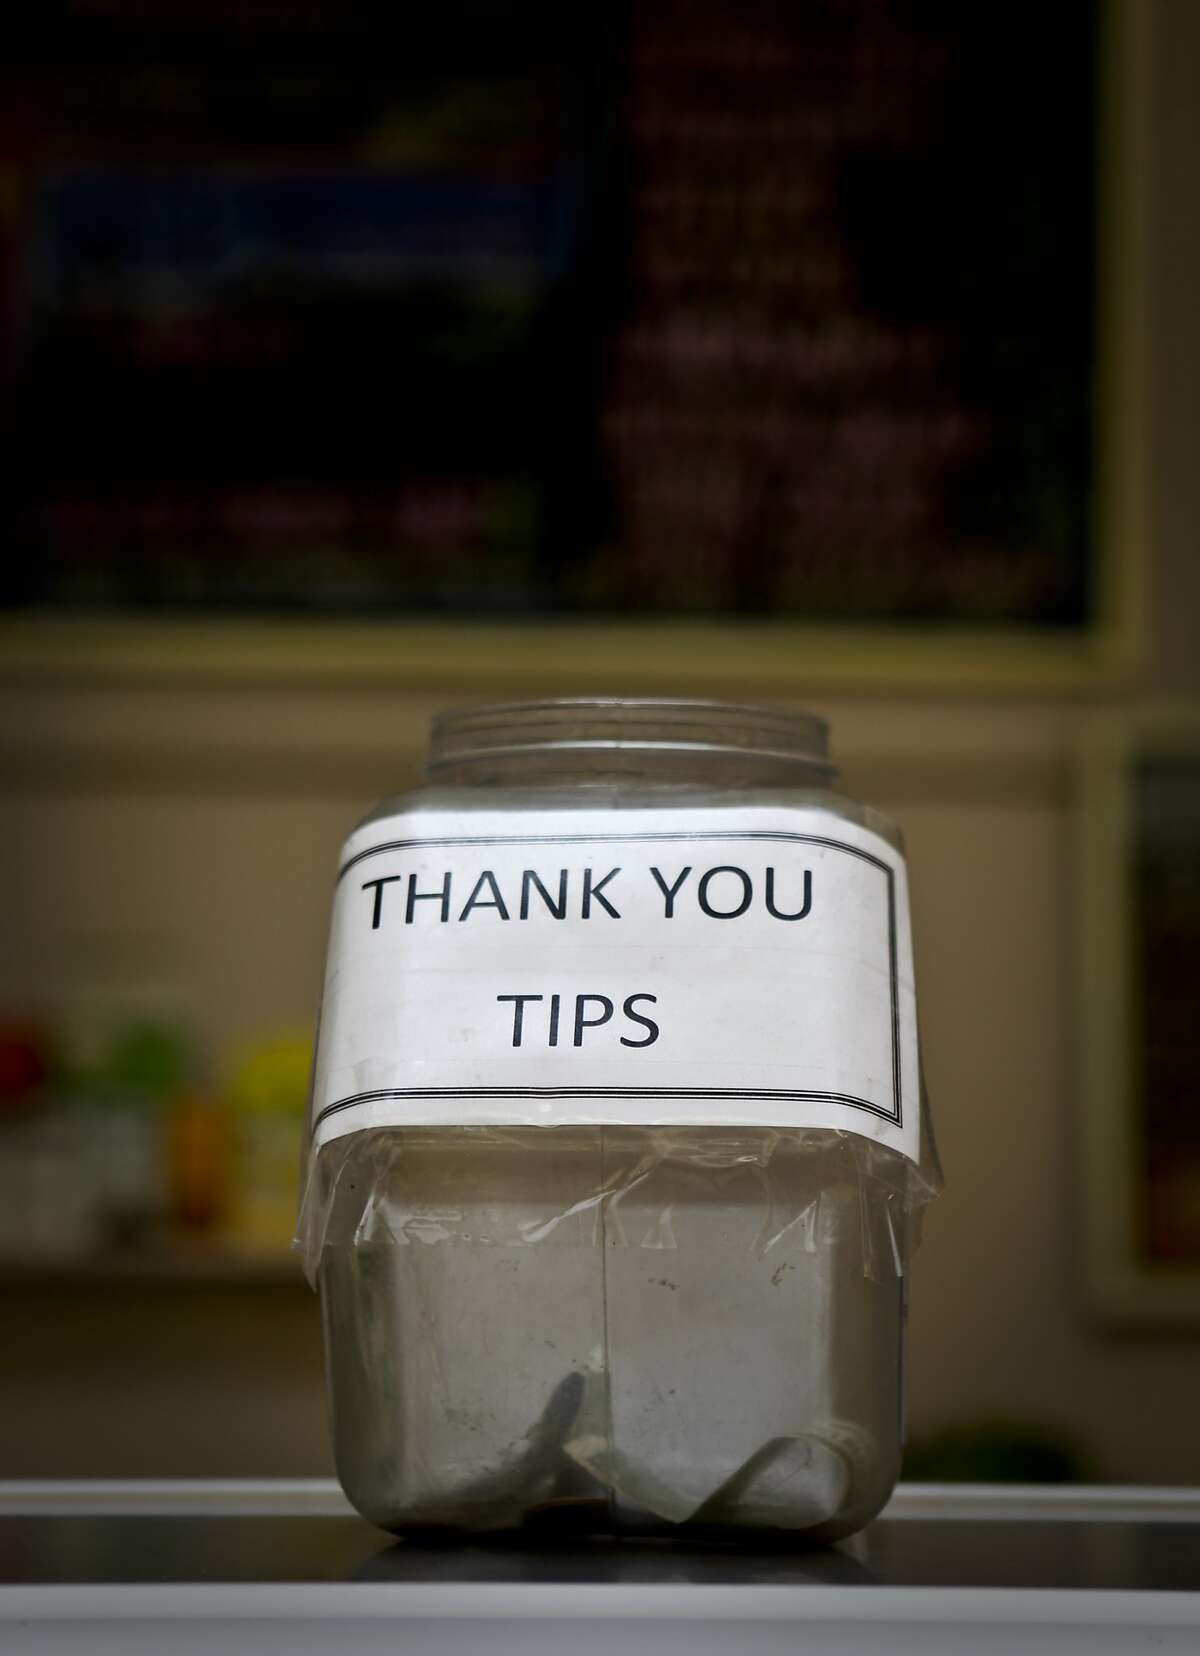 The tip jar at Arguello Super Market in San Francisco, Calif. is seen on Wednesday, Feb. 24, 2010.